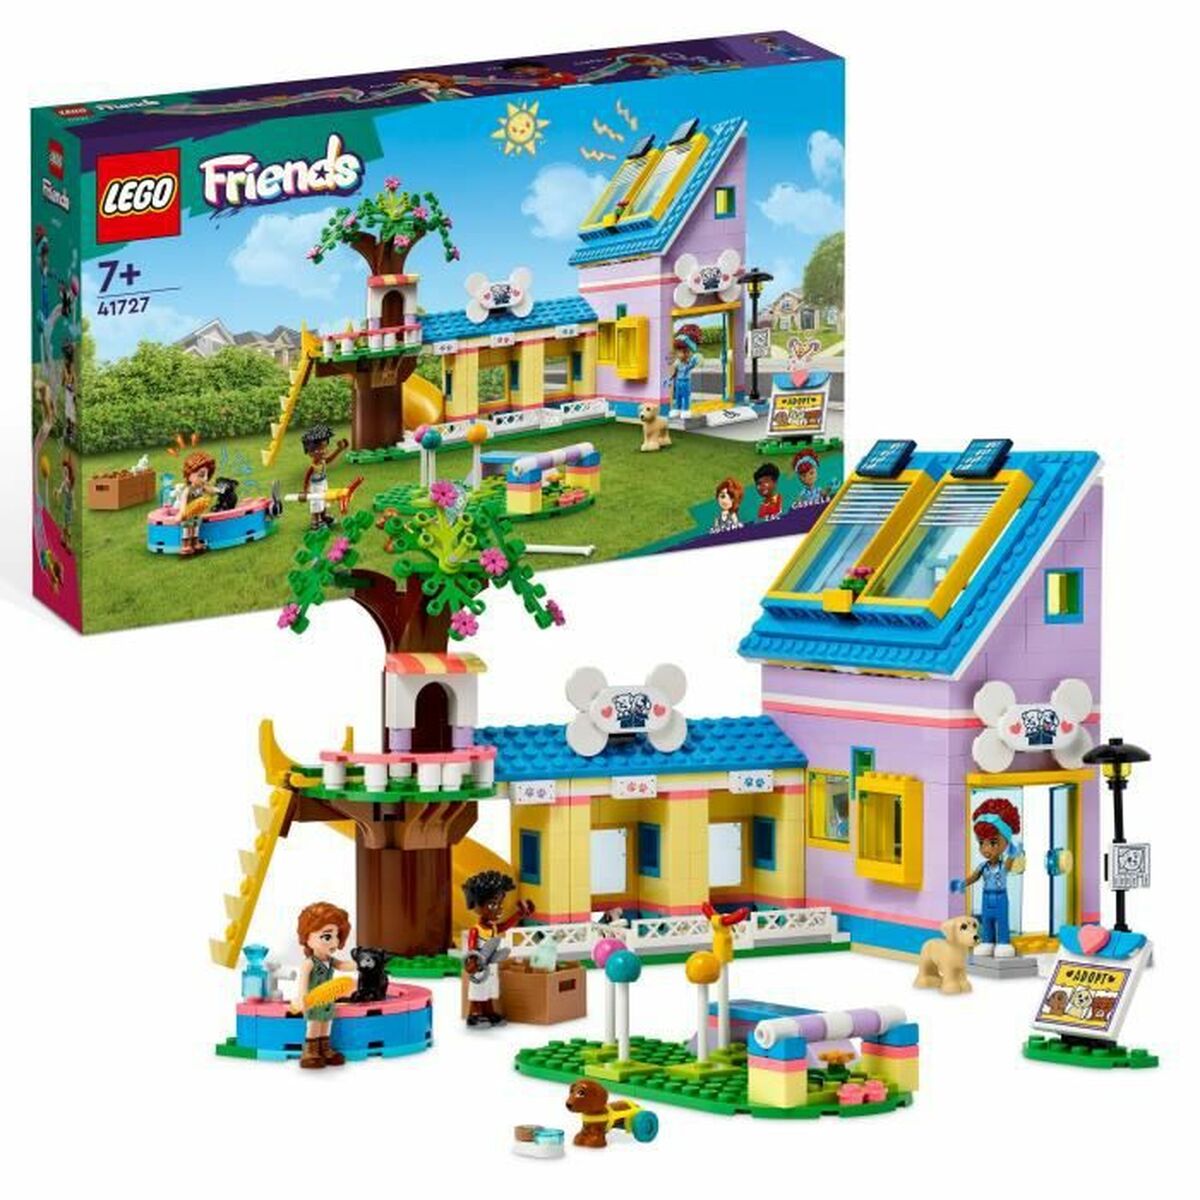 Playset Lego 41727 Friends 617 Piese